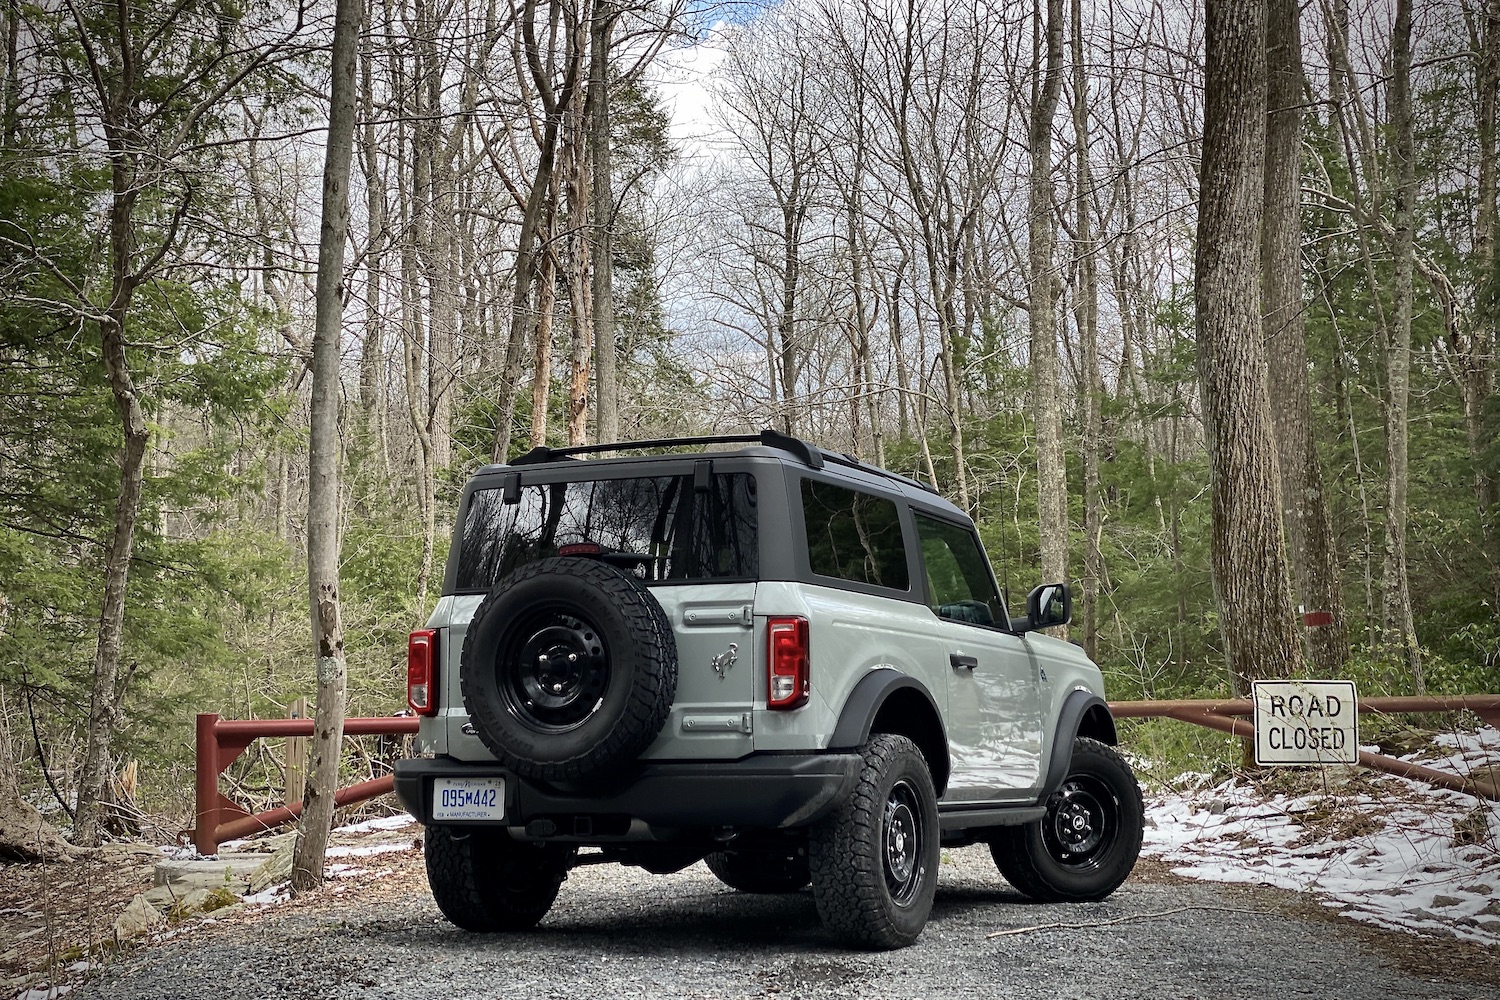 2021 Ford Bronco rear end angle from passenger side in front of a road closed sign on a dirt trail in front of bare trees.